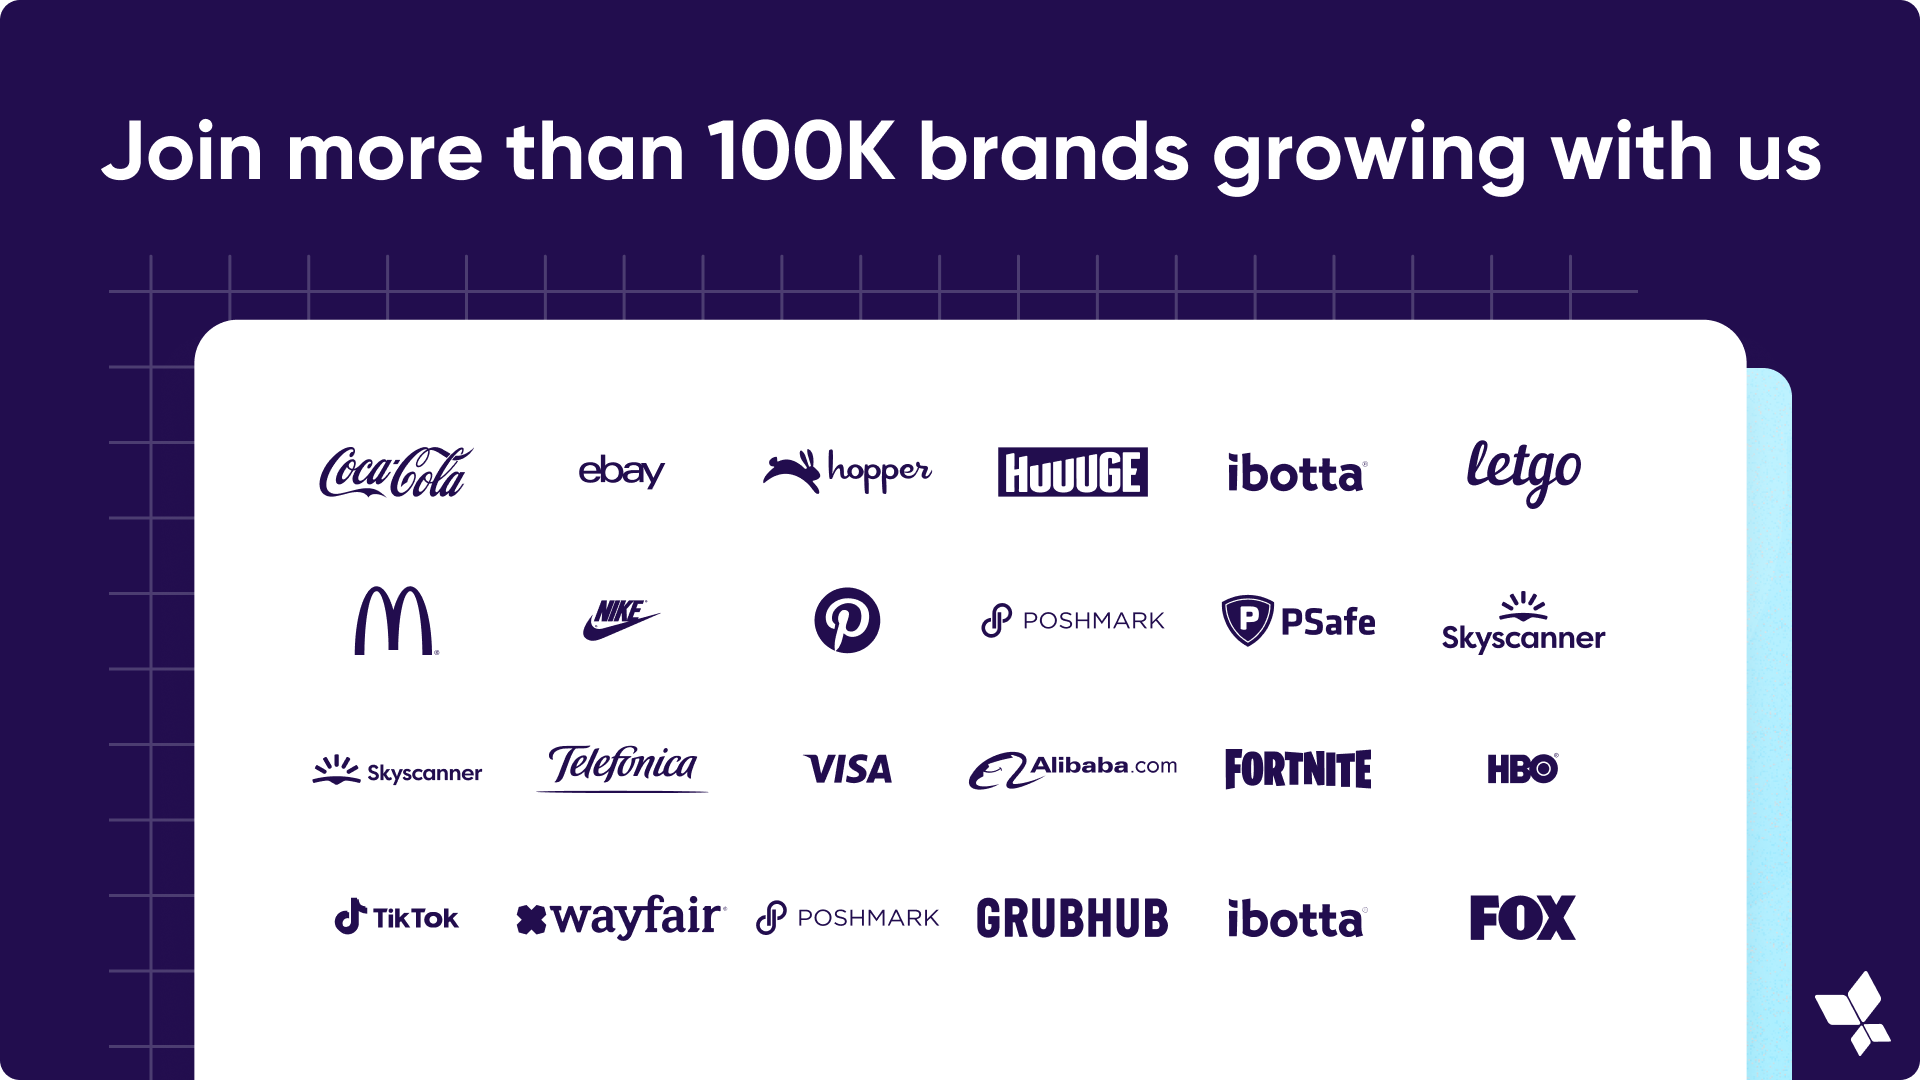 Join more than 100K brands growing with us